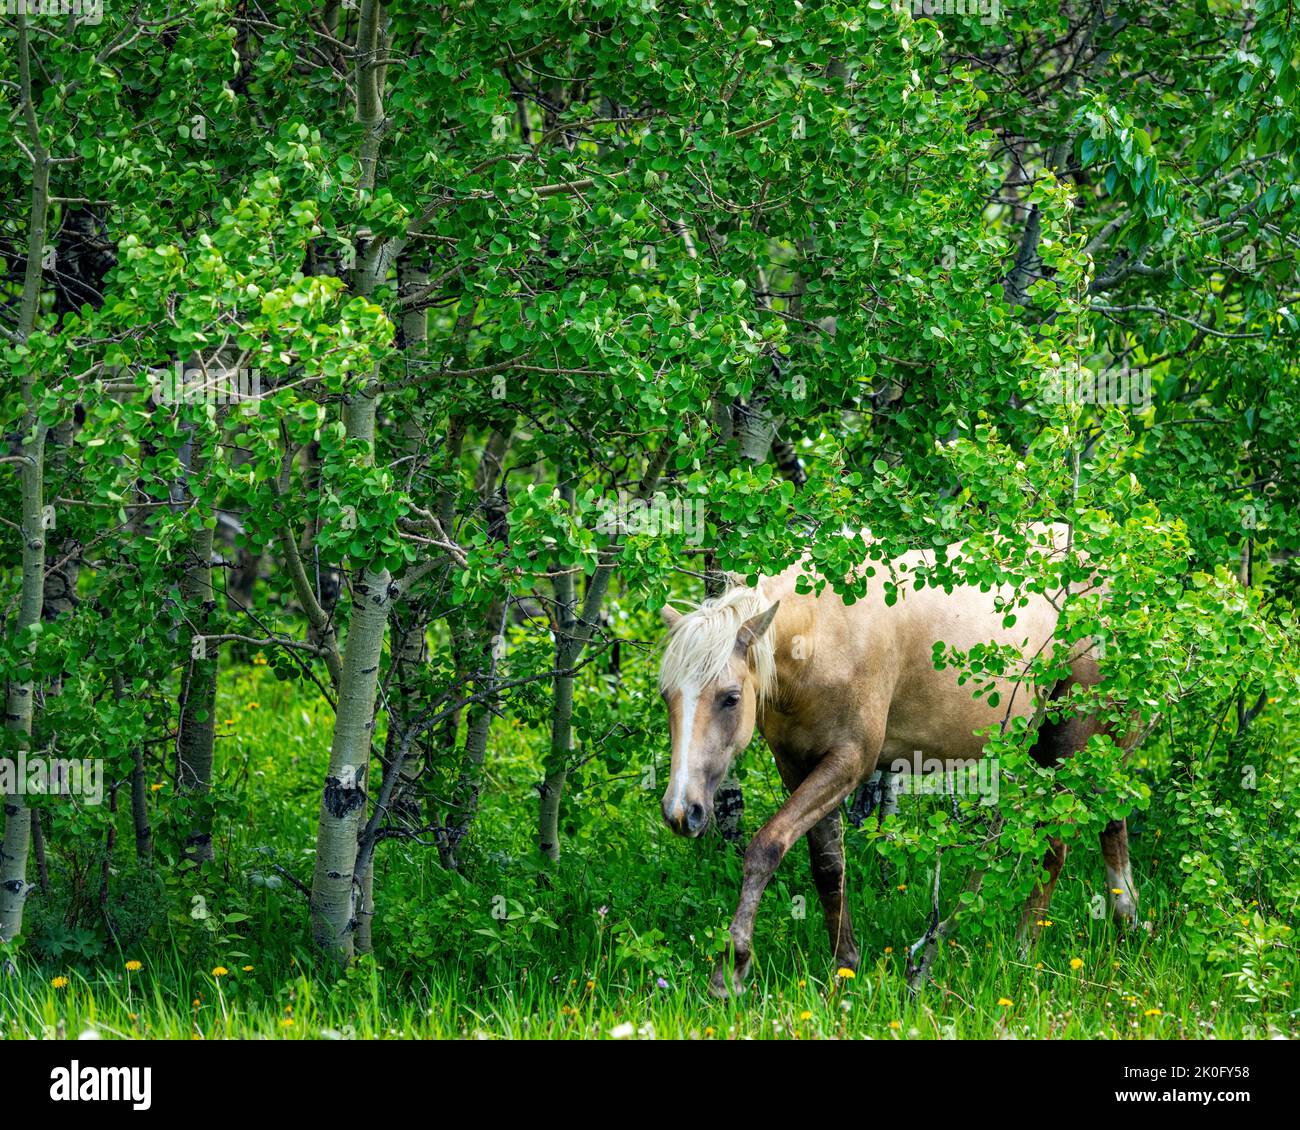 Wild horse emerges from a grove of green Aspen trees Stock Photo